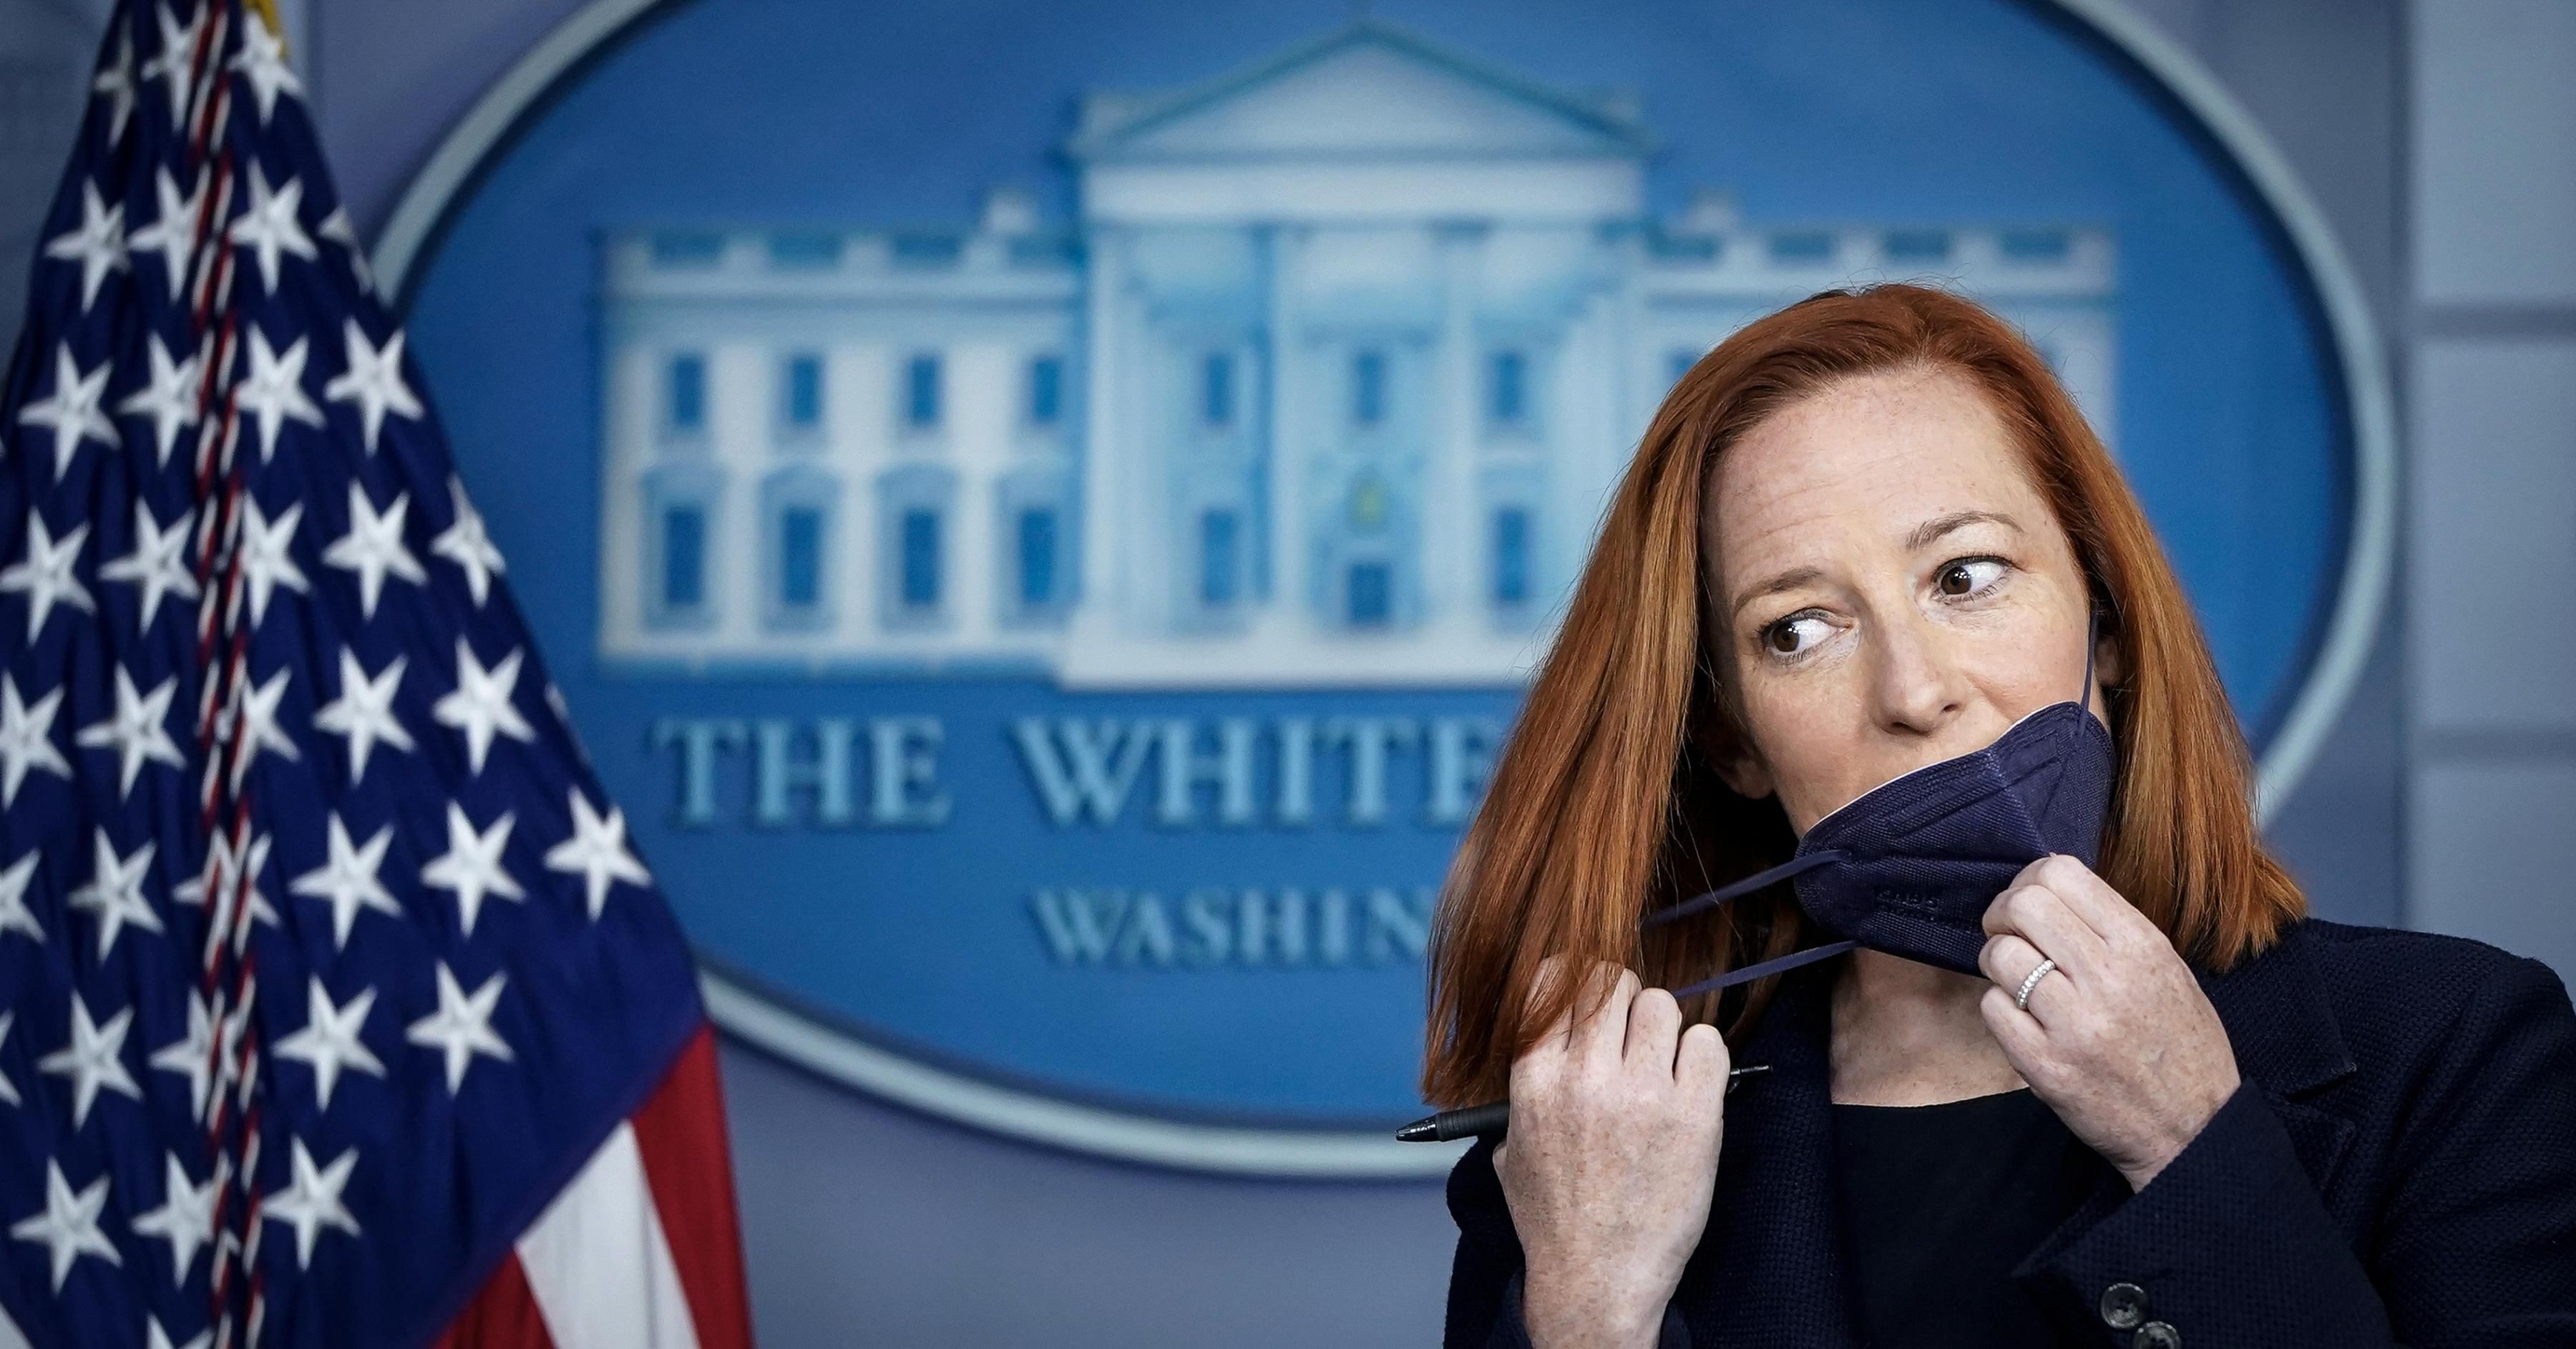 White House Press Secretary Jen Psaki removes her face covering as she arrives for the daily press briefing at the White House on March 29, 2021 in Washington, D.C. (Photo: Drew Angerer/Getty Images)